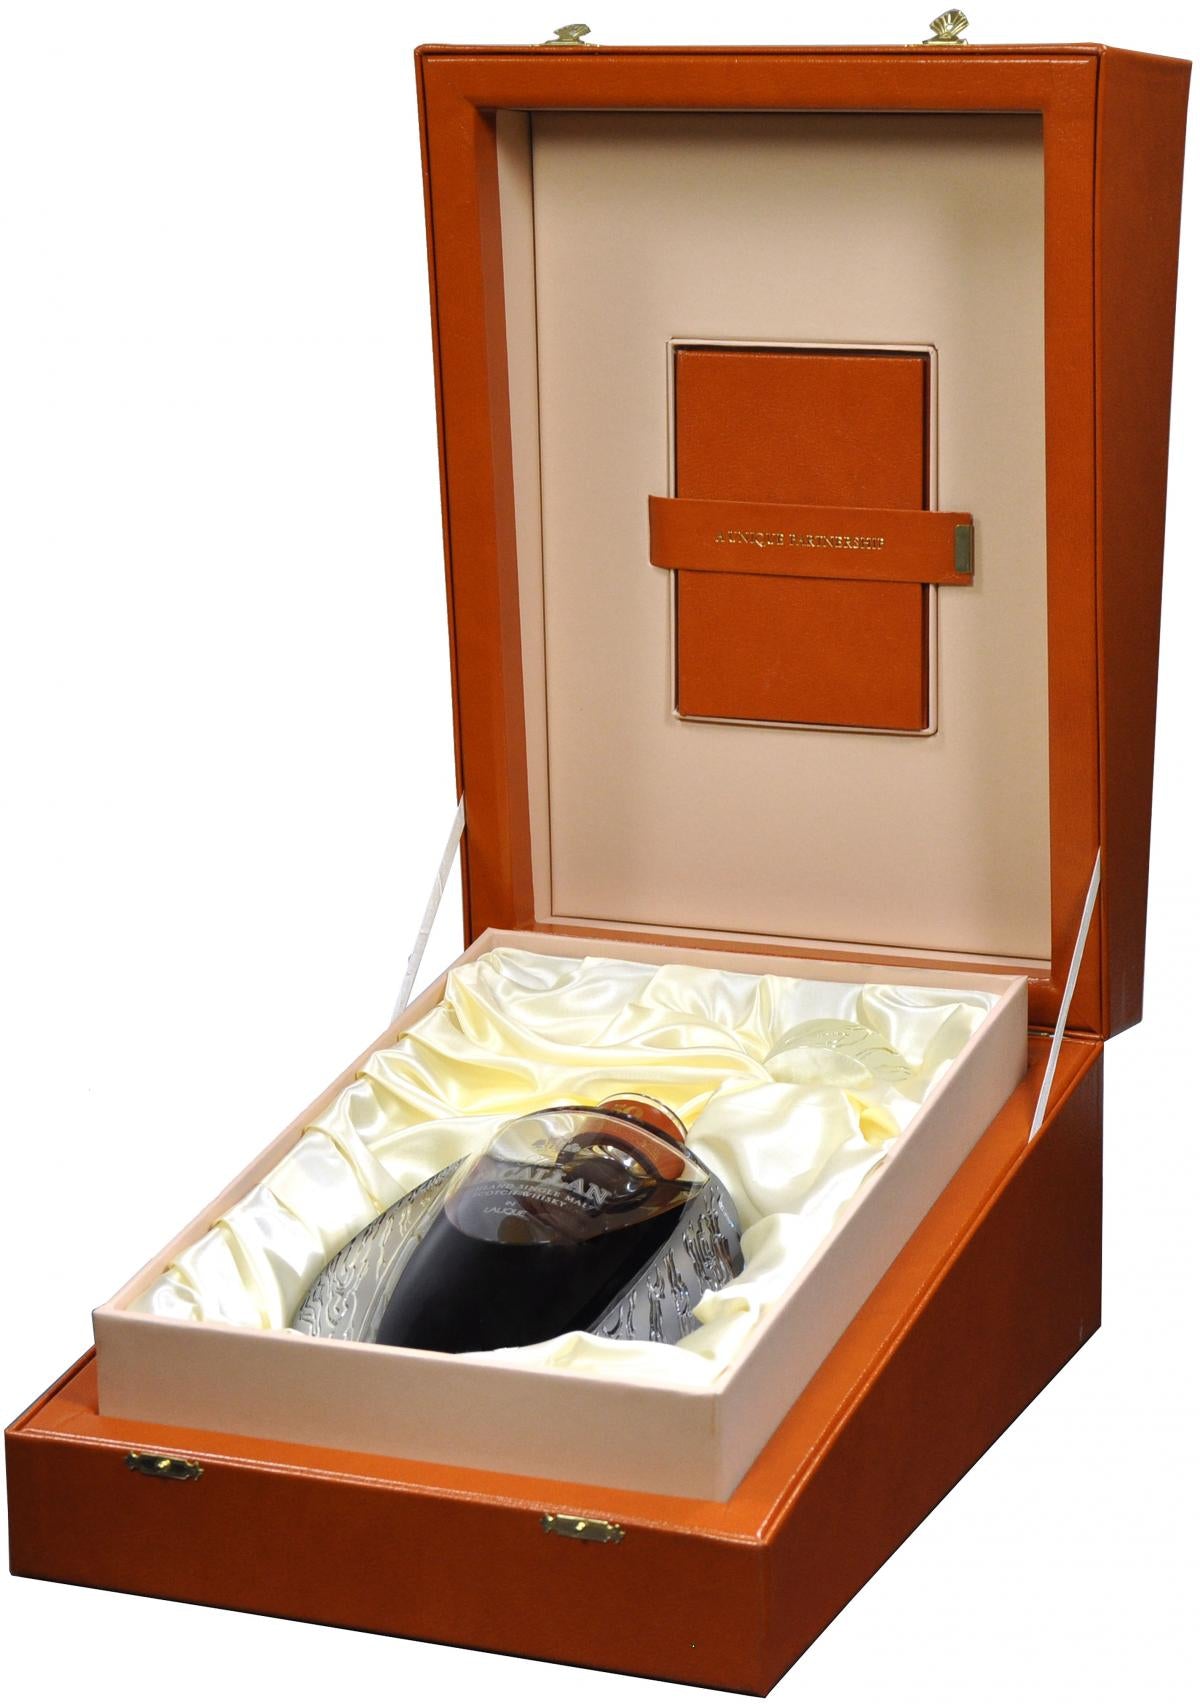 macallan 50 year old lalique decanter, first release, speyside single malt scotch whisky